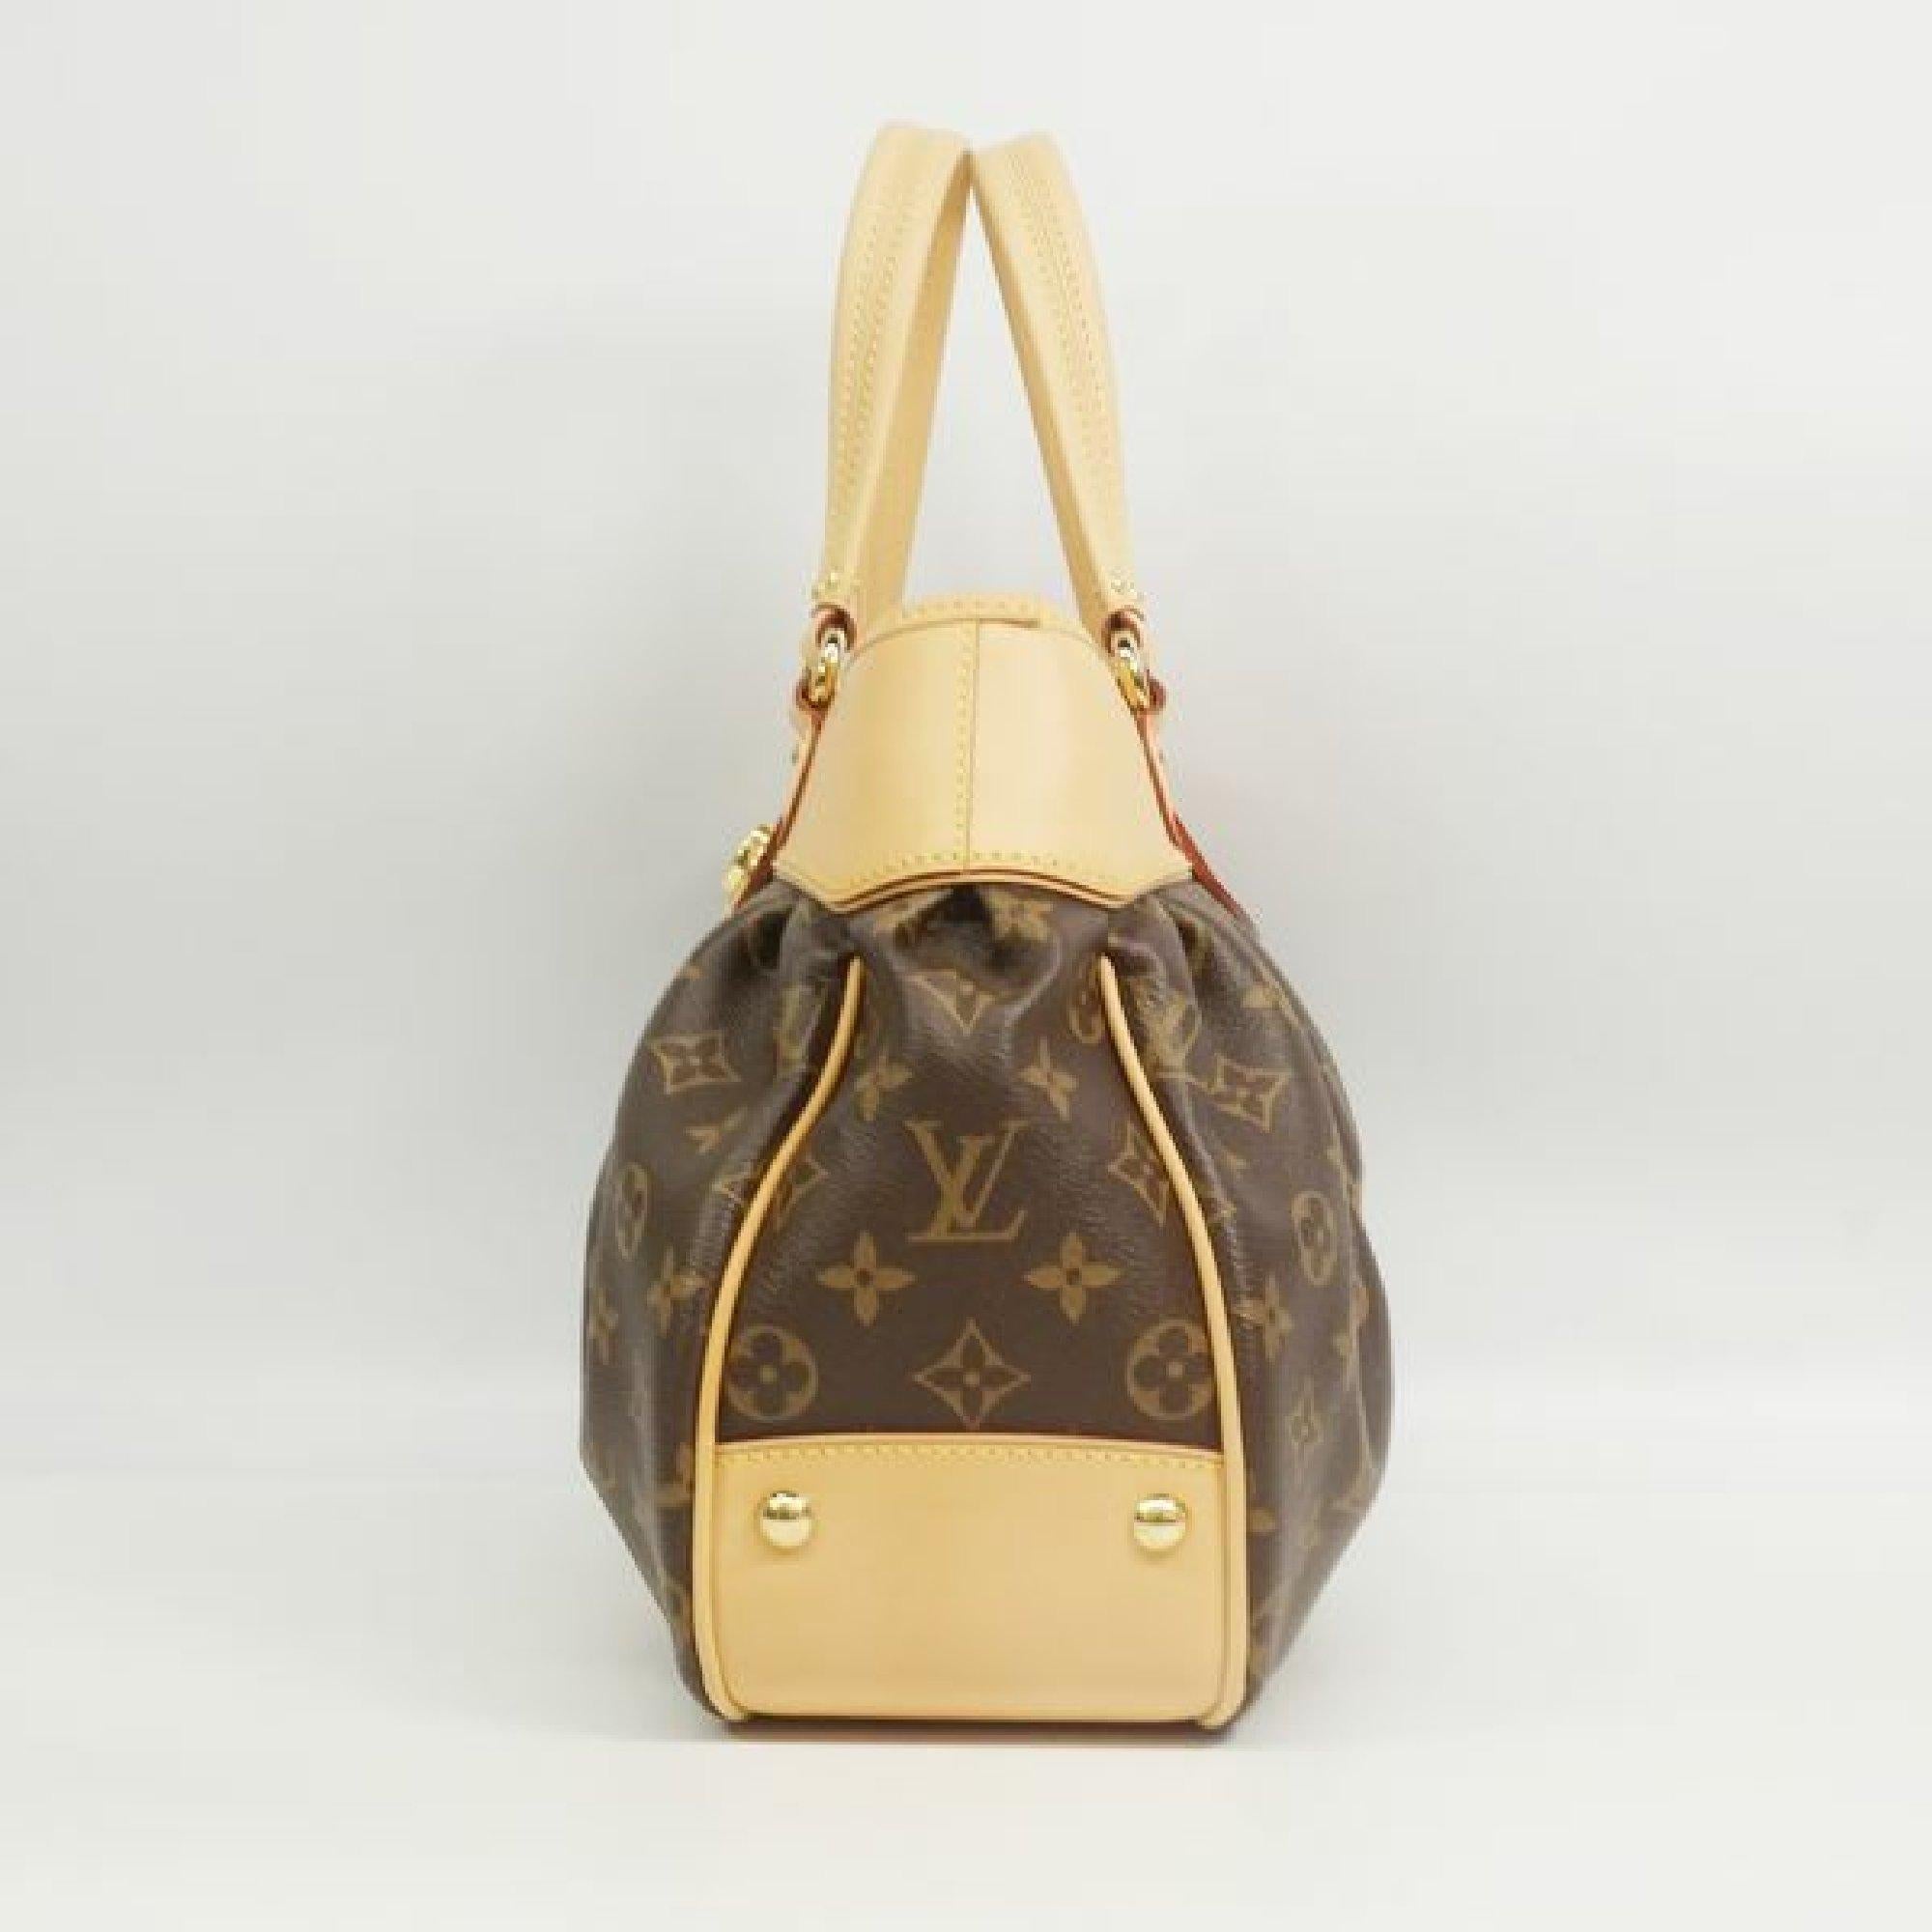 An authentic LOUIS VUITTON Boesi MM Womens handbag M45714 The outside material is Monogram canvas. The pattern is BoesiMM. This item is Contemporary. The year of manufacture would be 2012.
Rank
A Good Condition
There are little bit signs of wear,